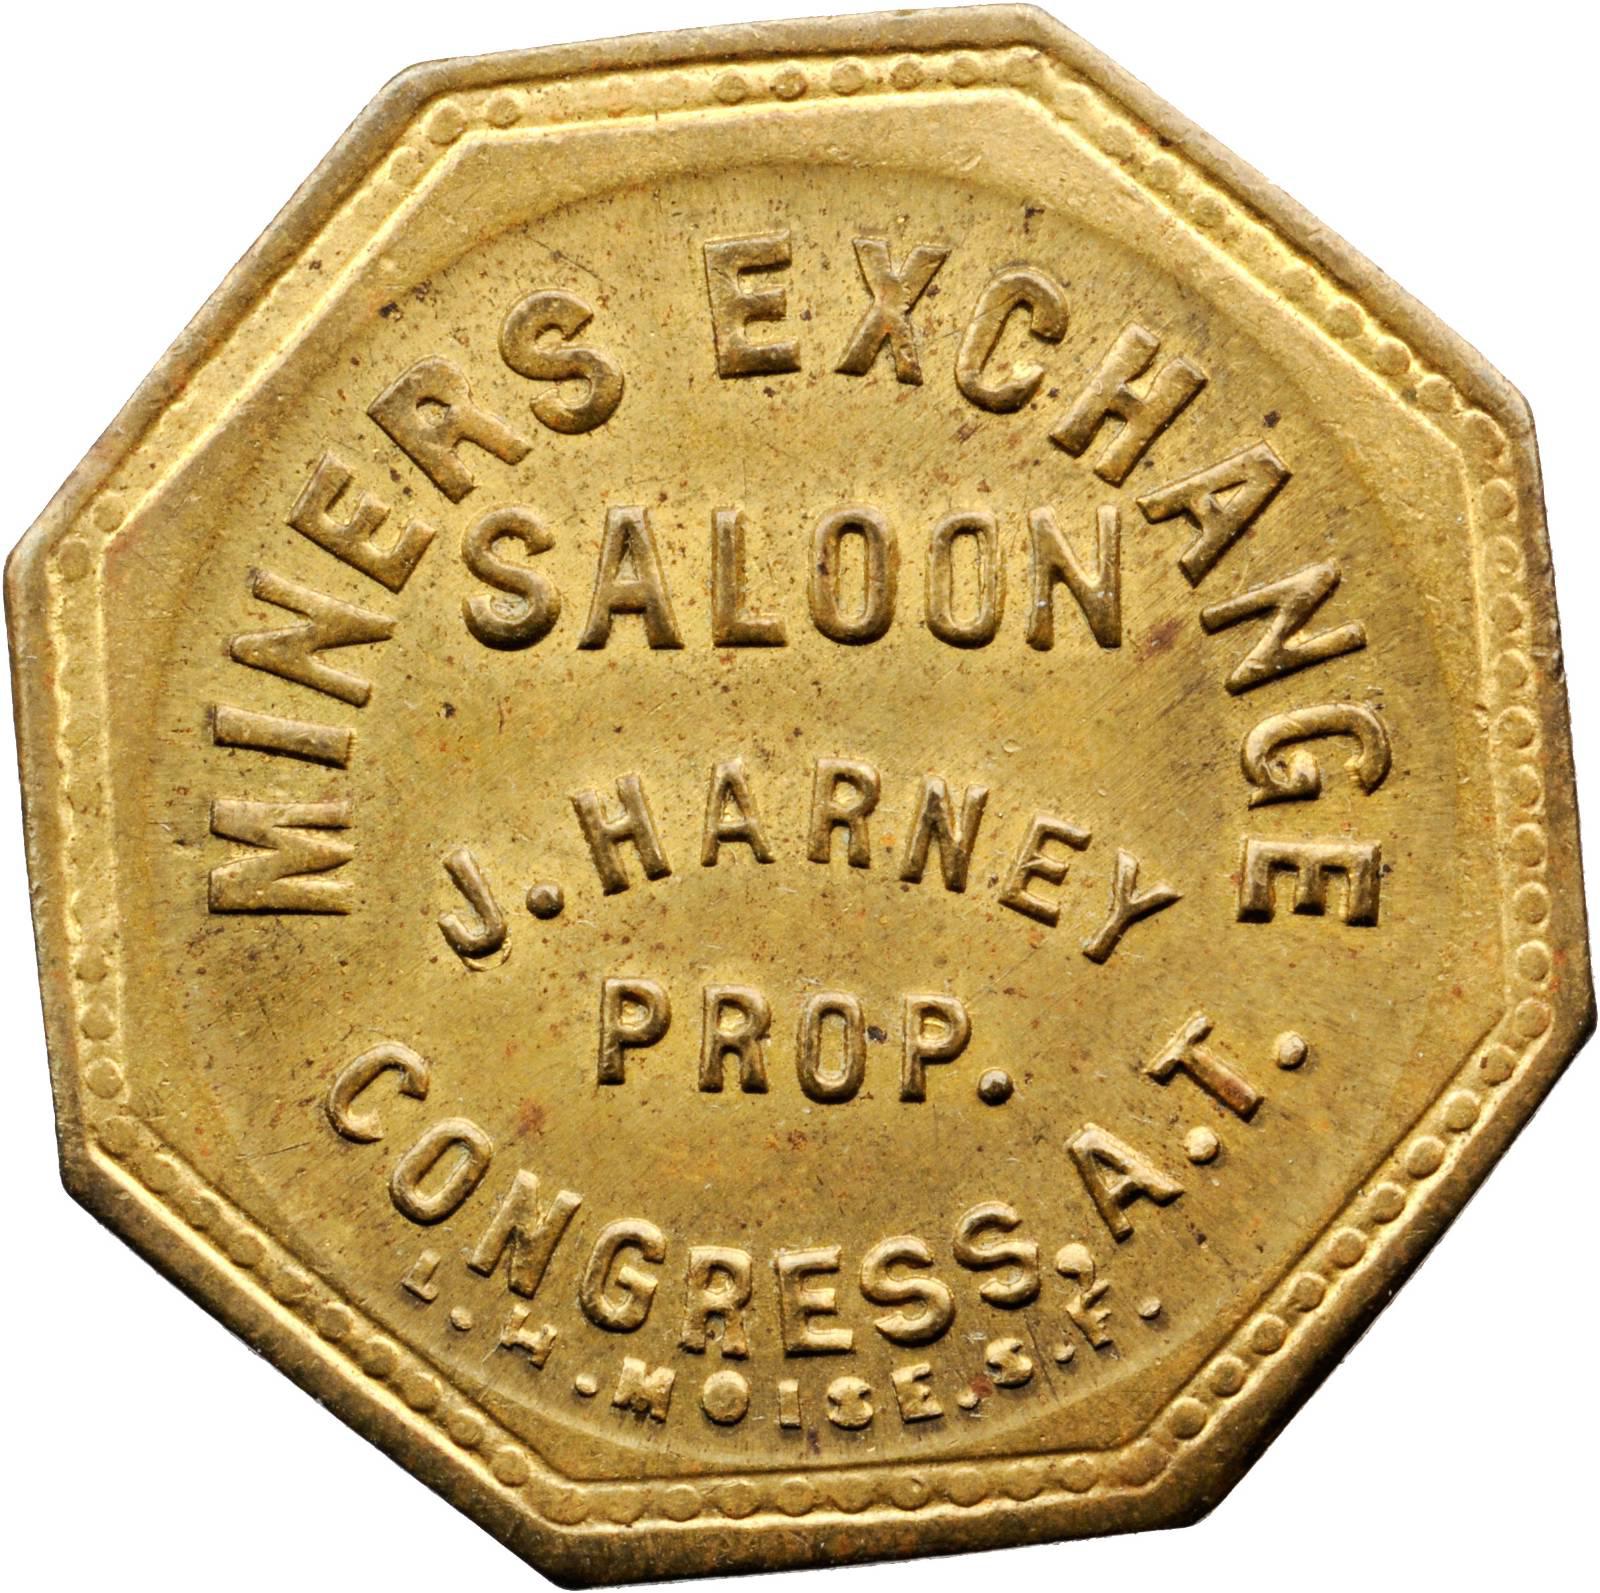 J. Harney Miners Exchange Saloon Token | Sell Rare Tokens